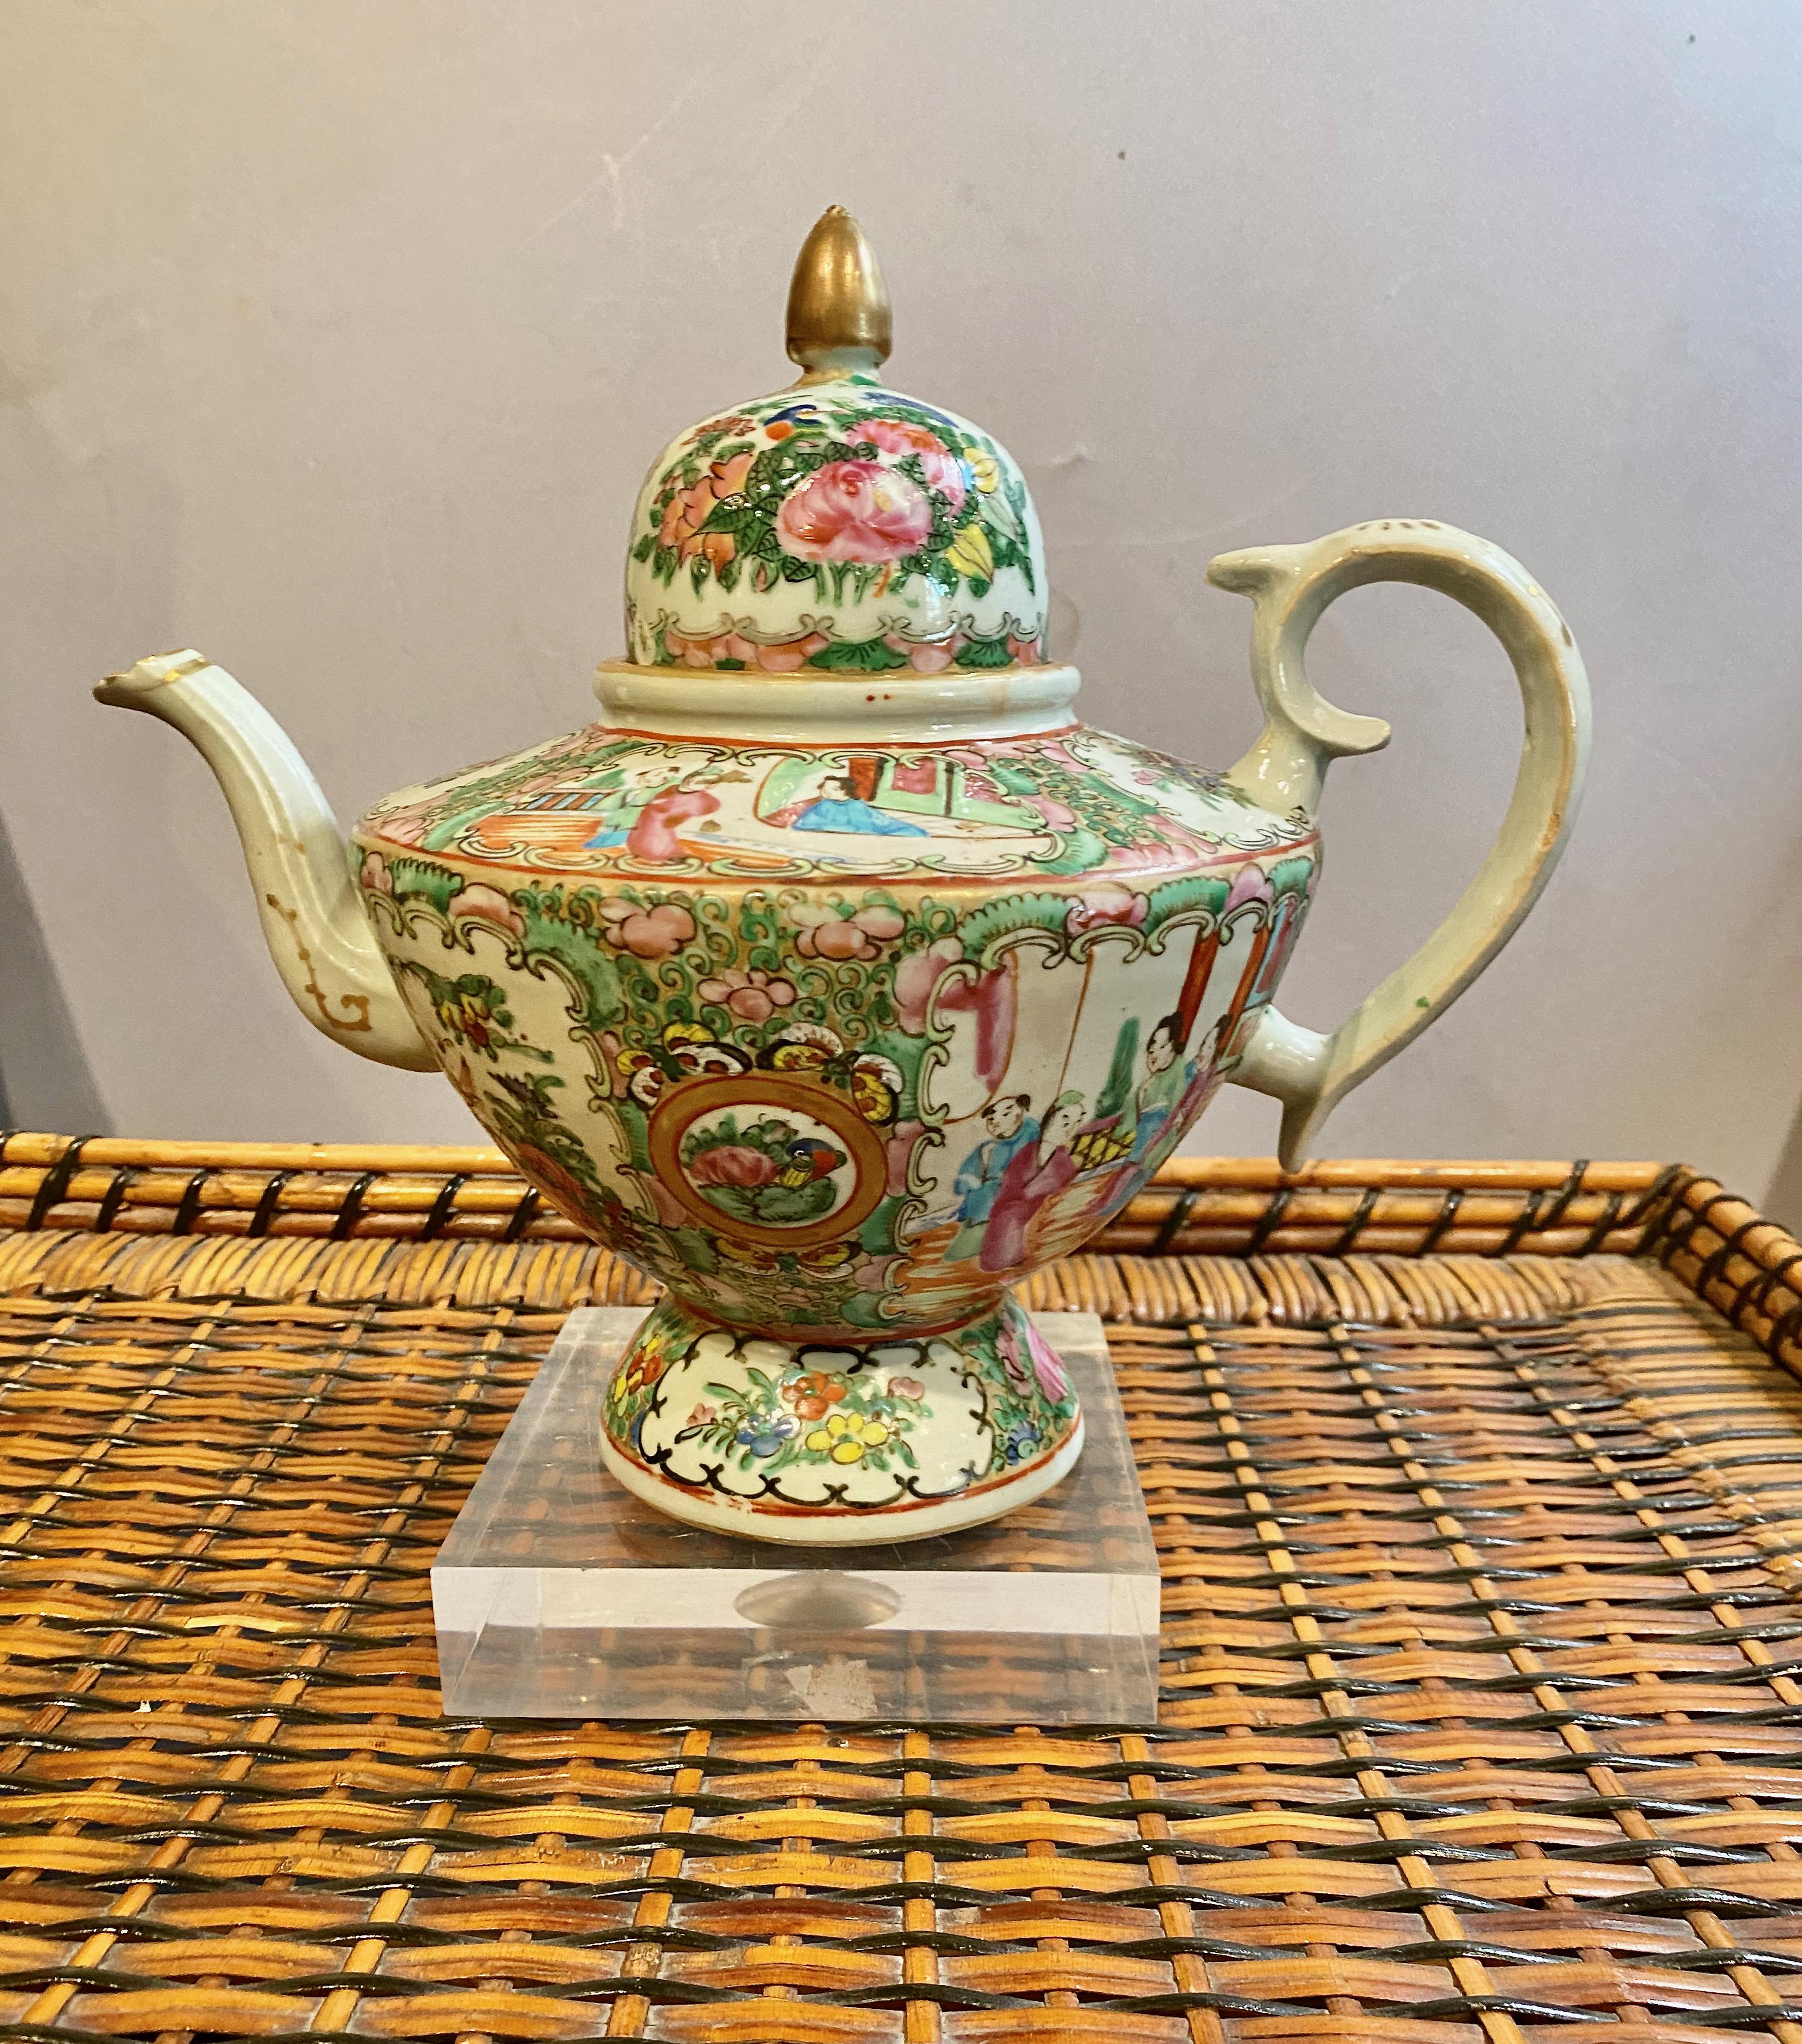 This is a charming antique mid-19th century Chinese Export Rose Medallion Teapot. The form of the teapot was modeled after English silver teapots of the period. The teapot is in overall very good condition. There is an under-edge chip to the deep